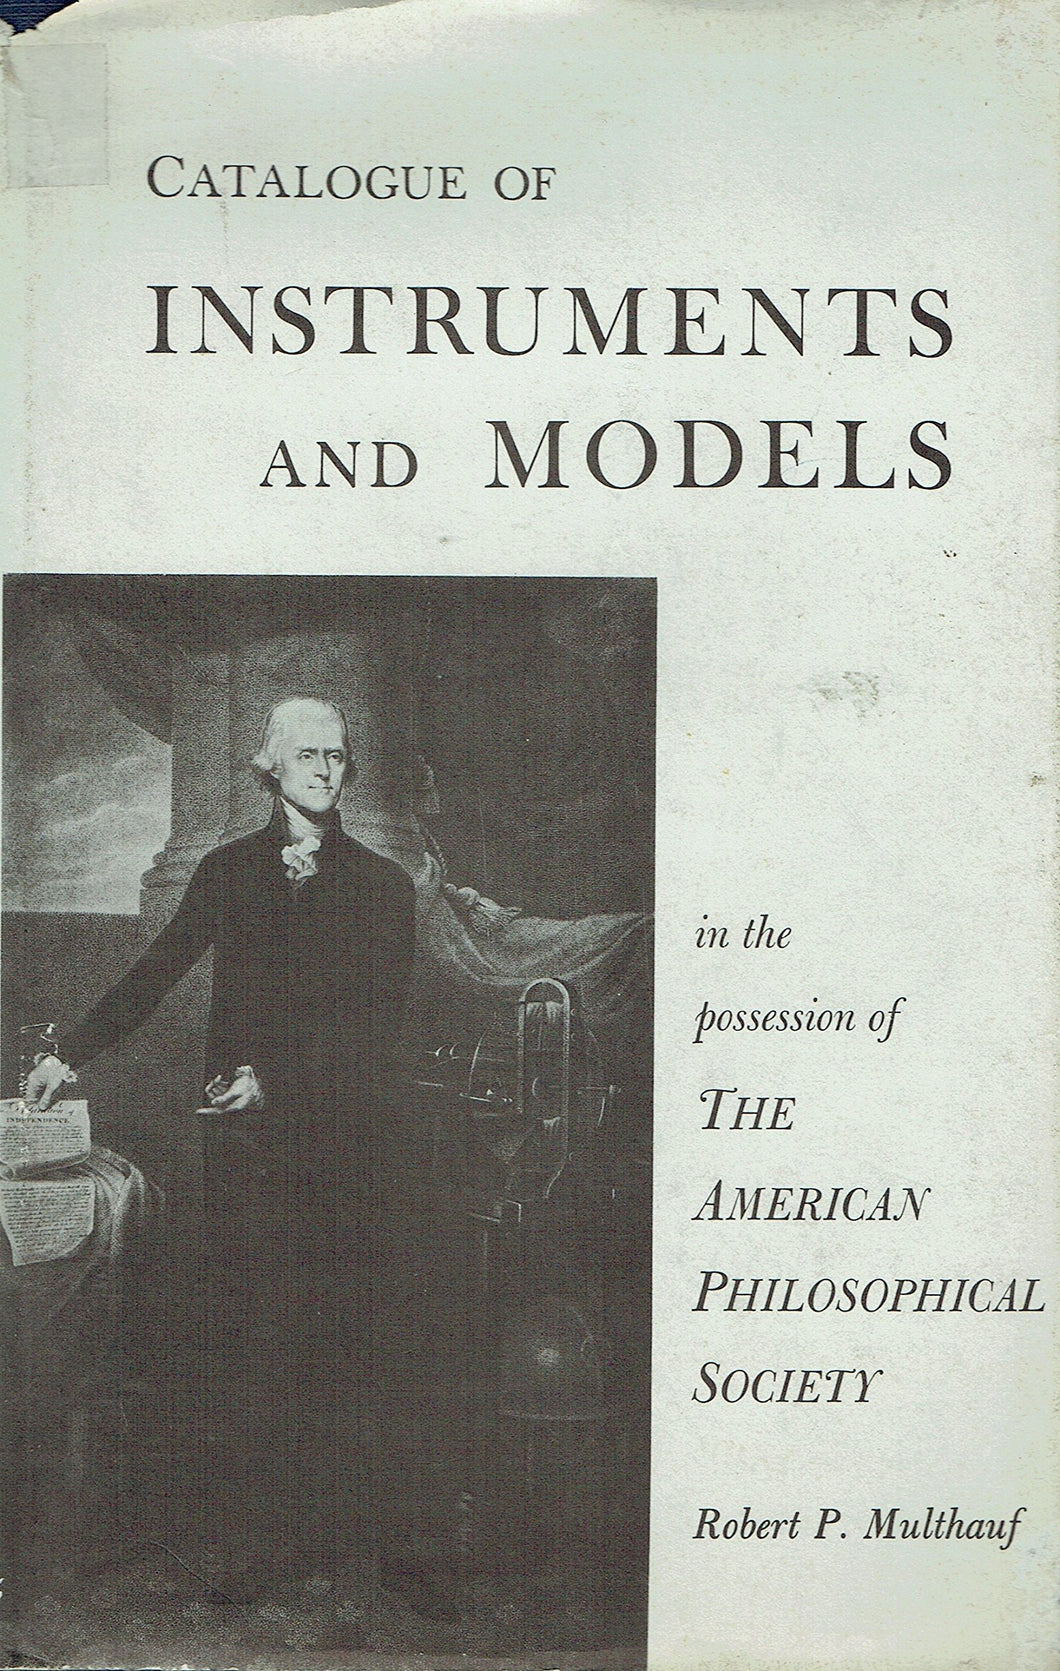 Catalogue of Instruments and Models in the Possession of the American Philosophical Society